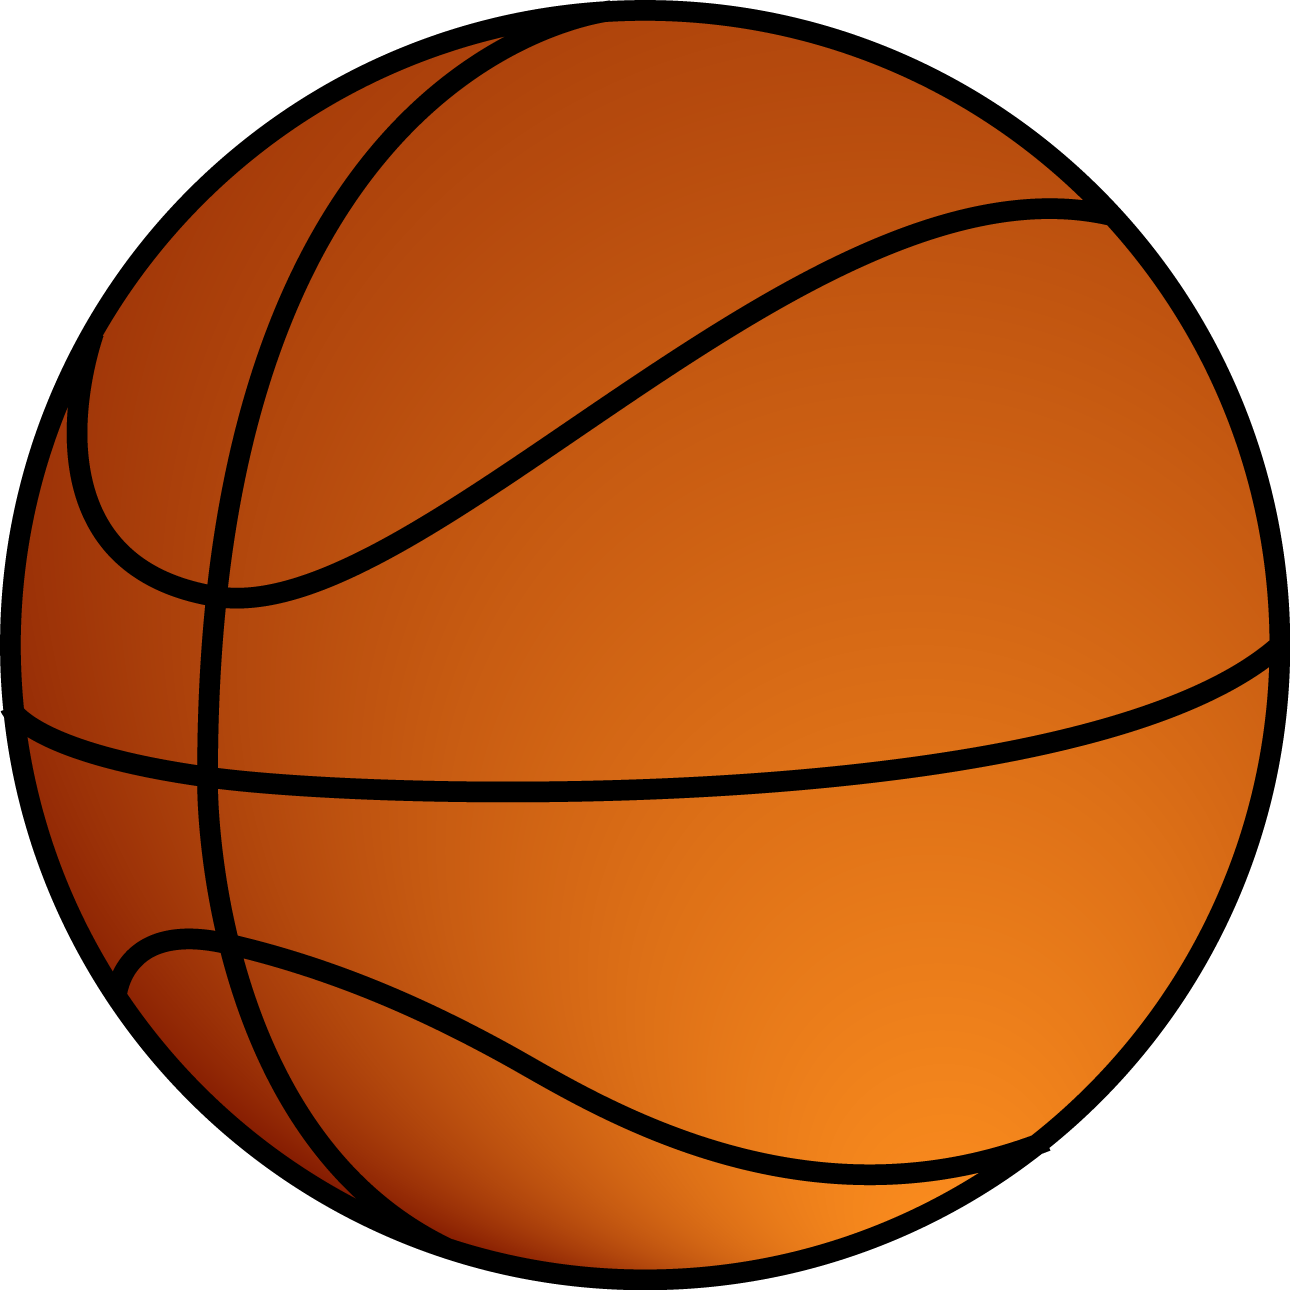 Basketball ball PNG images, free download.